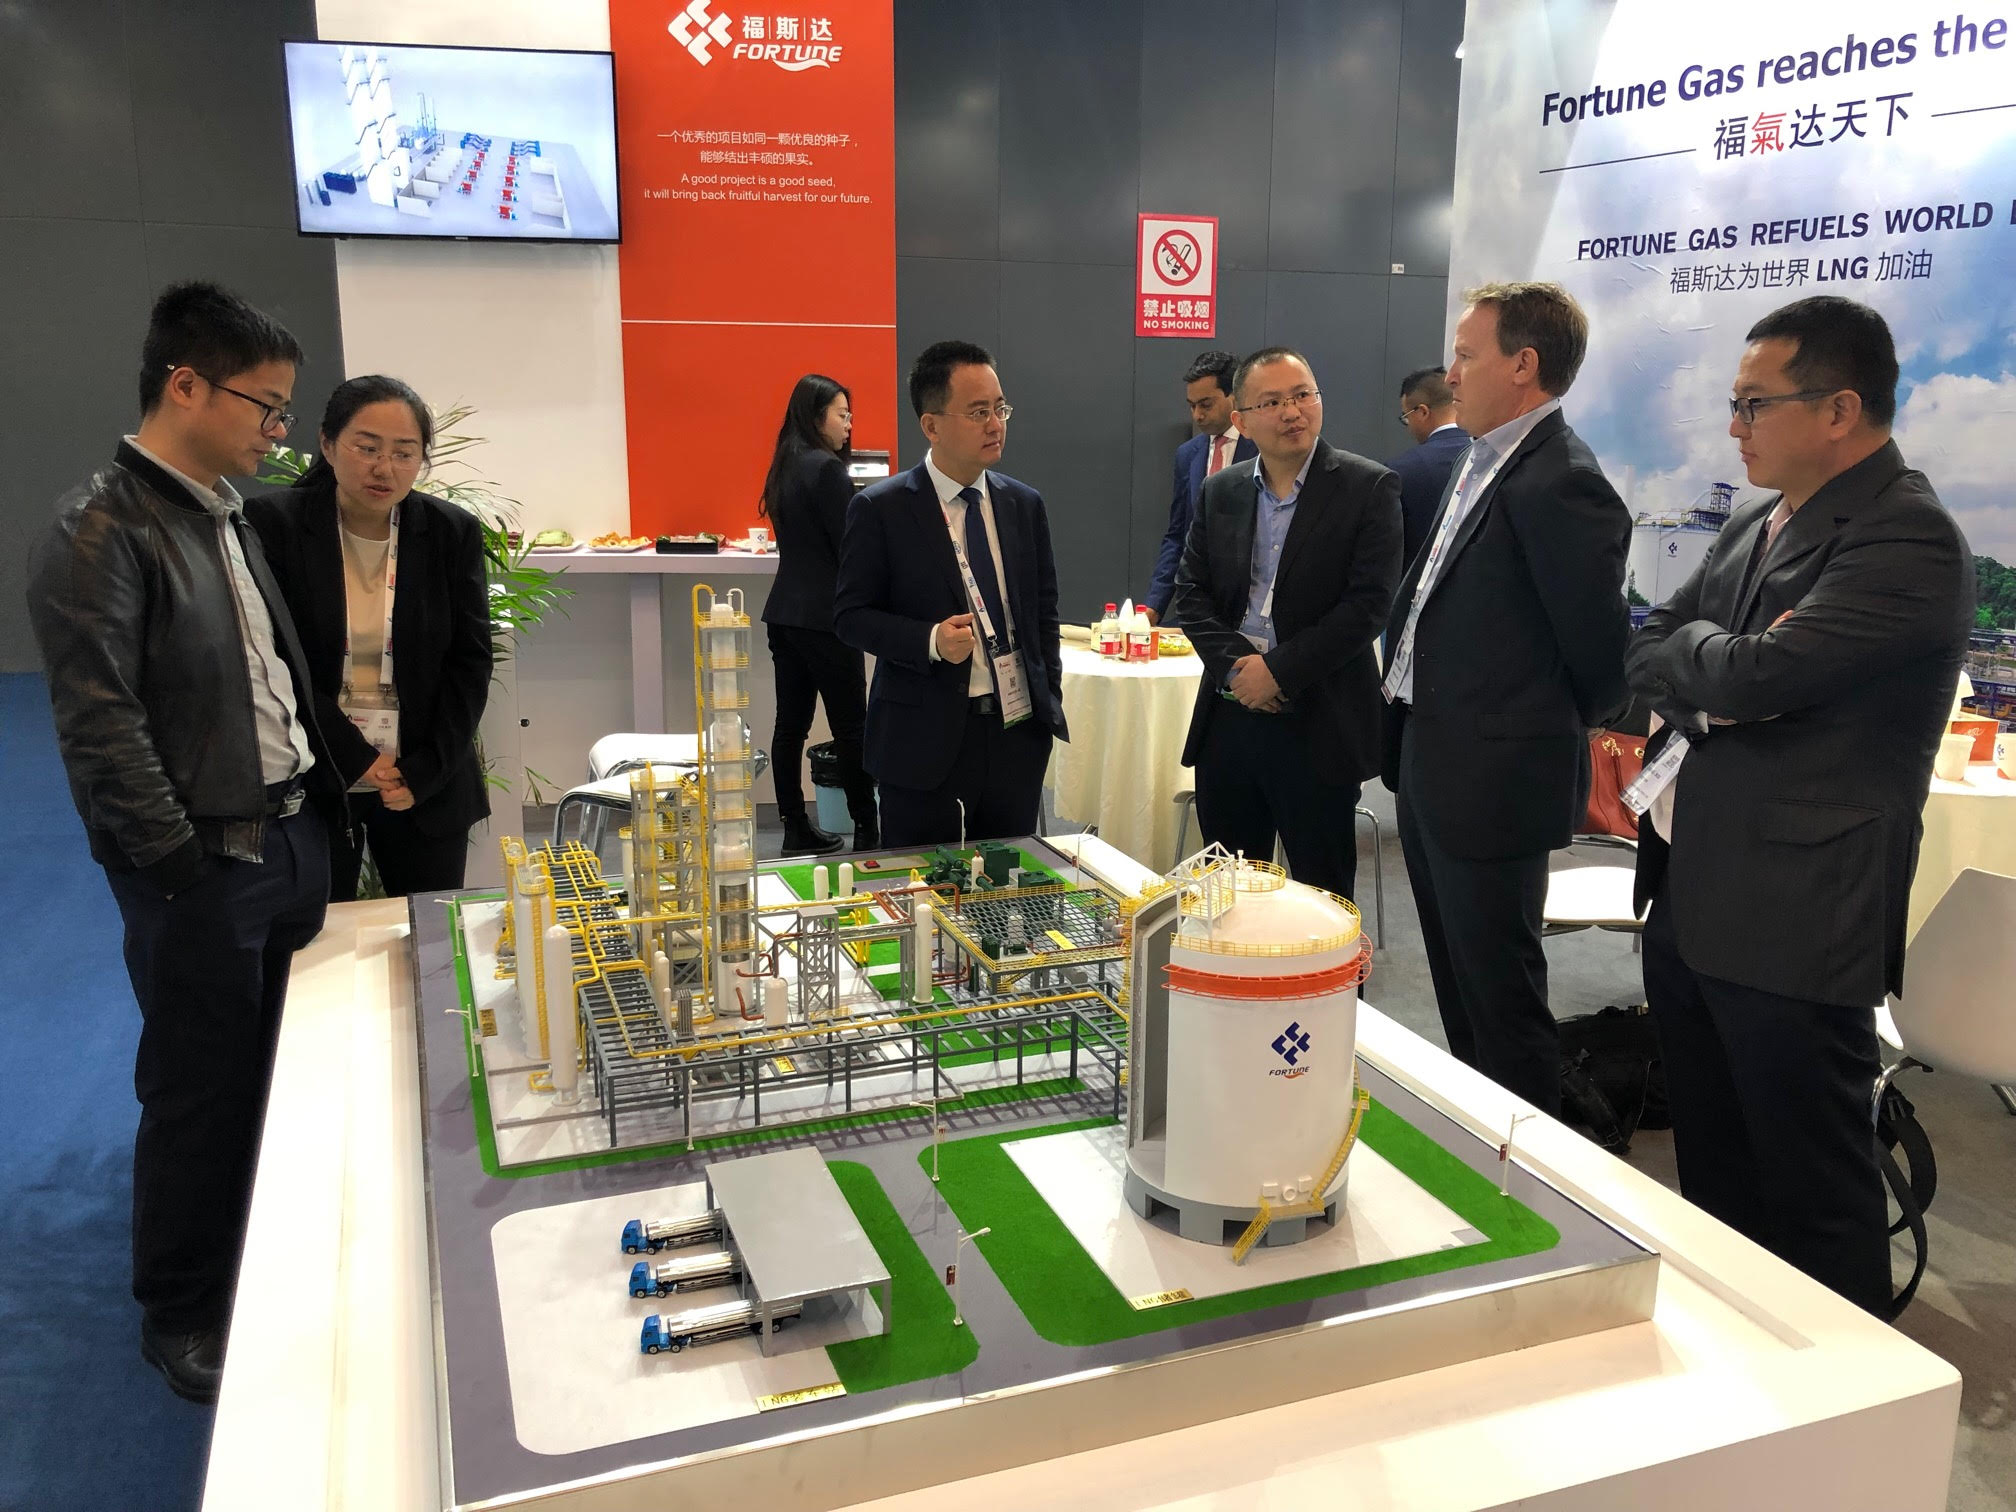 Managing Director Bruce Marriott and Chairman and majority shareholder Yuzheng Xie at the world's largest LNG conference, LNG 19 in Shanghai.